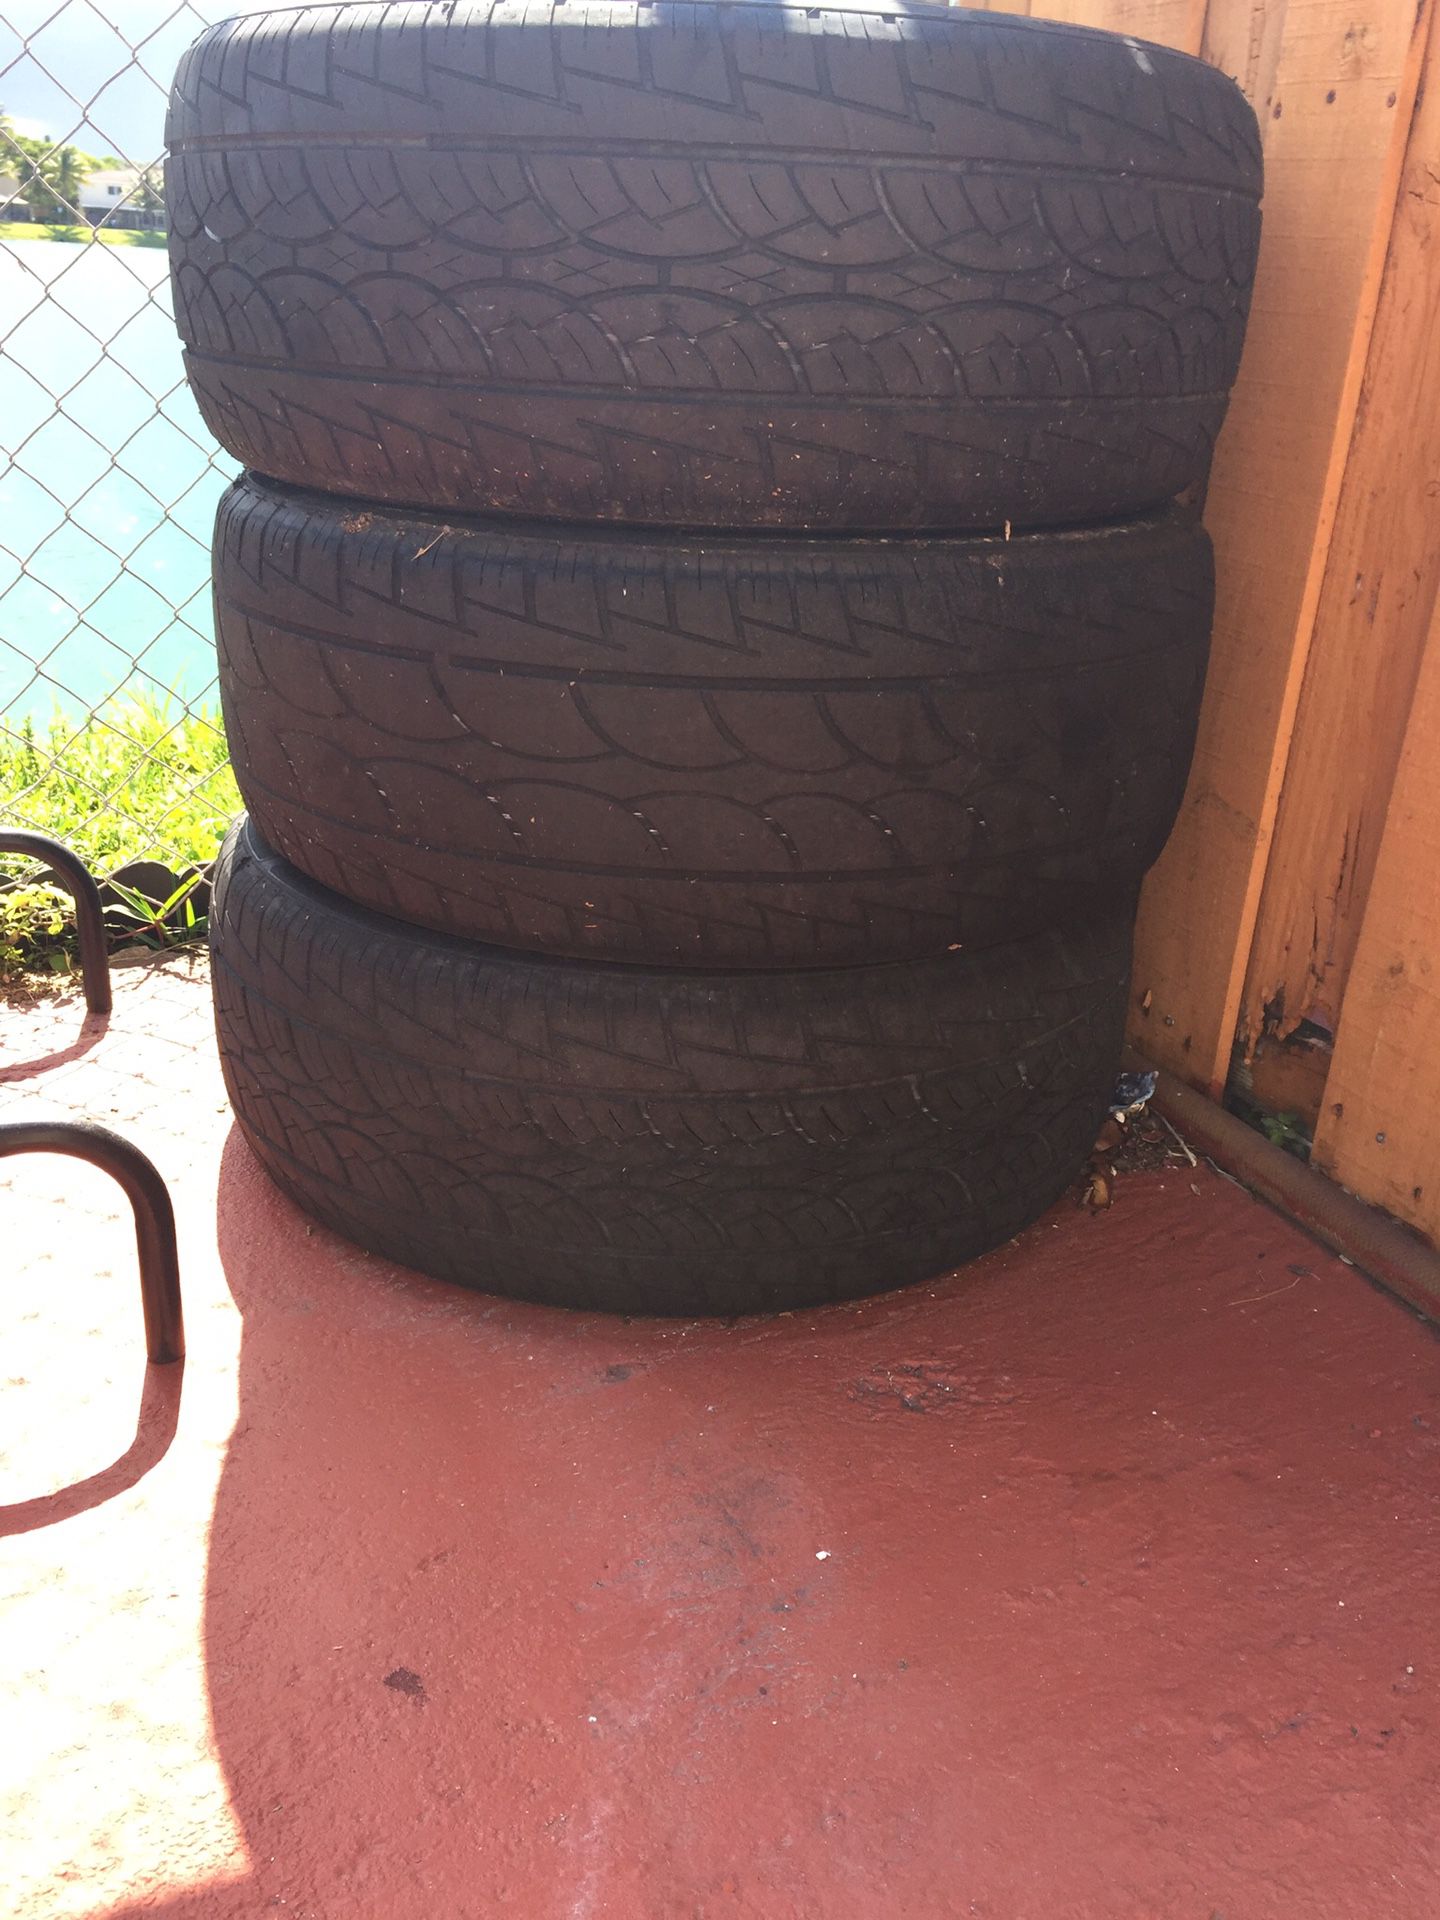 3 used tires